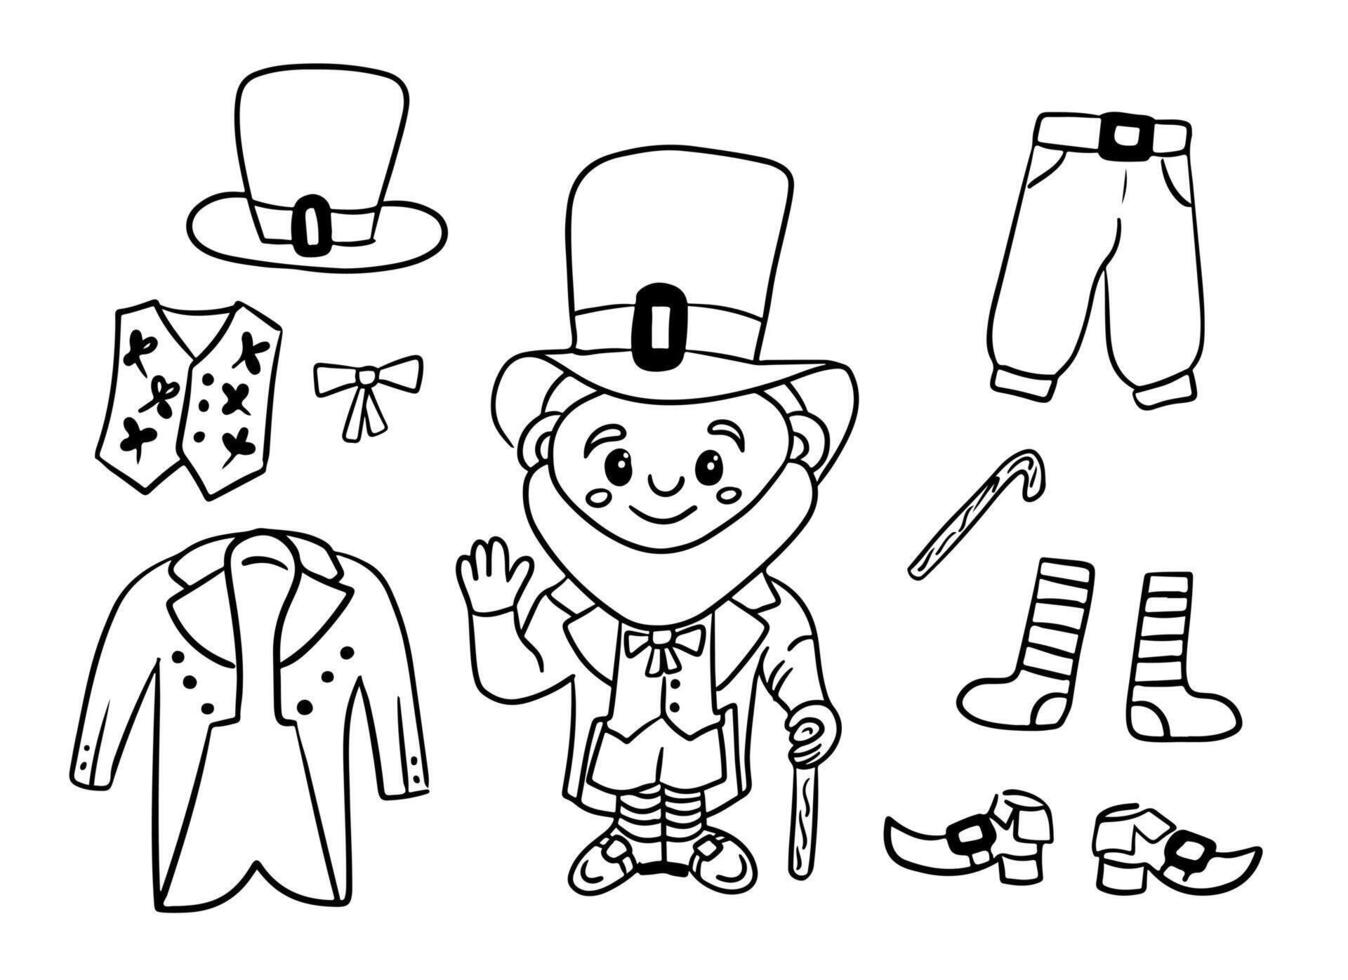 Doodle outline set of leprechaun and his clothes. Sketch hand drawn design for coloring pages, stickers. Black pants, socks, hat, tailcoat and shoes of Irish traditional character on white background vector